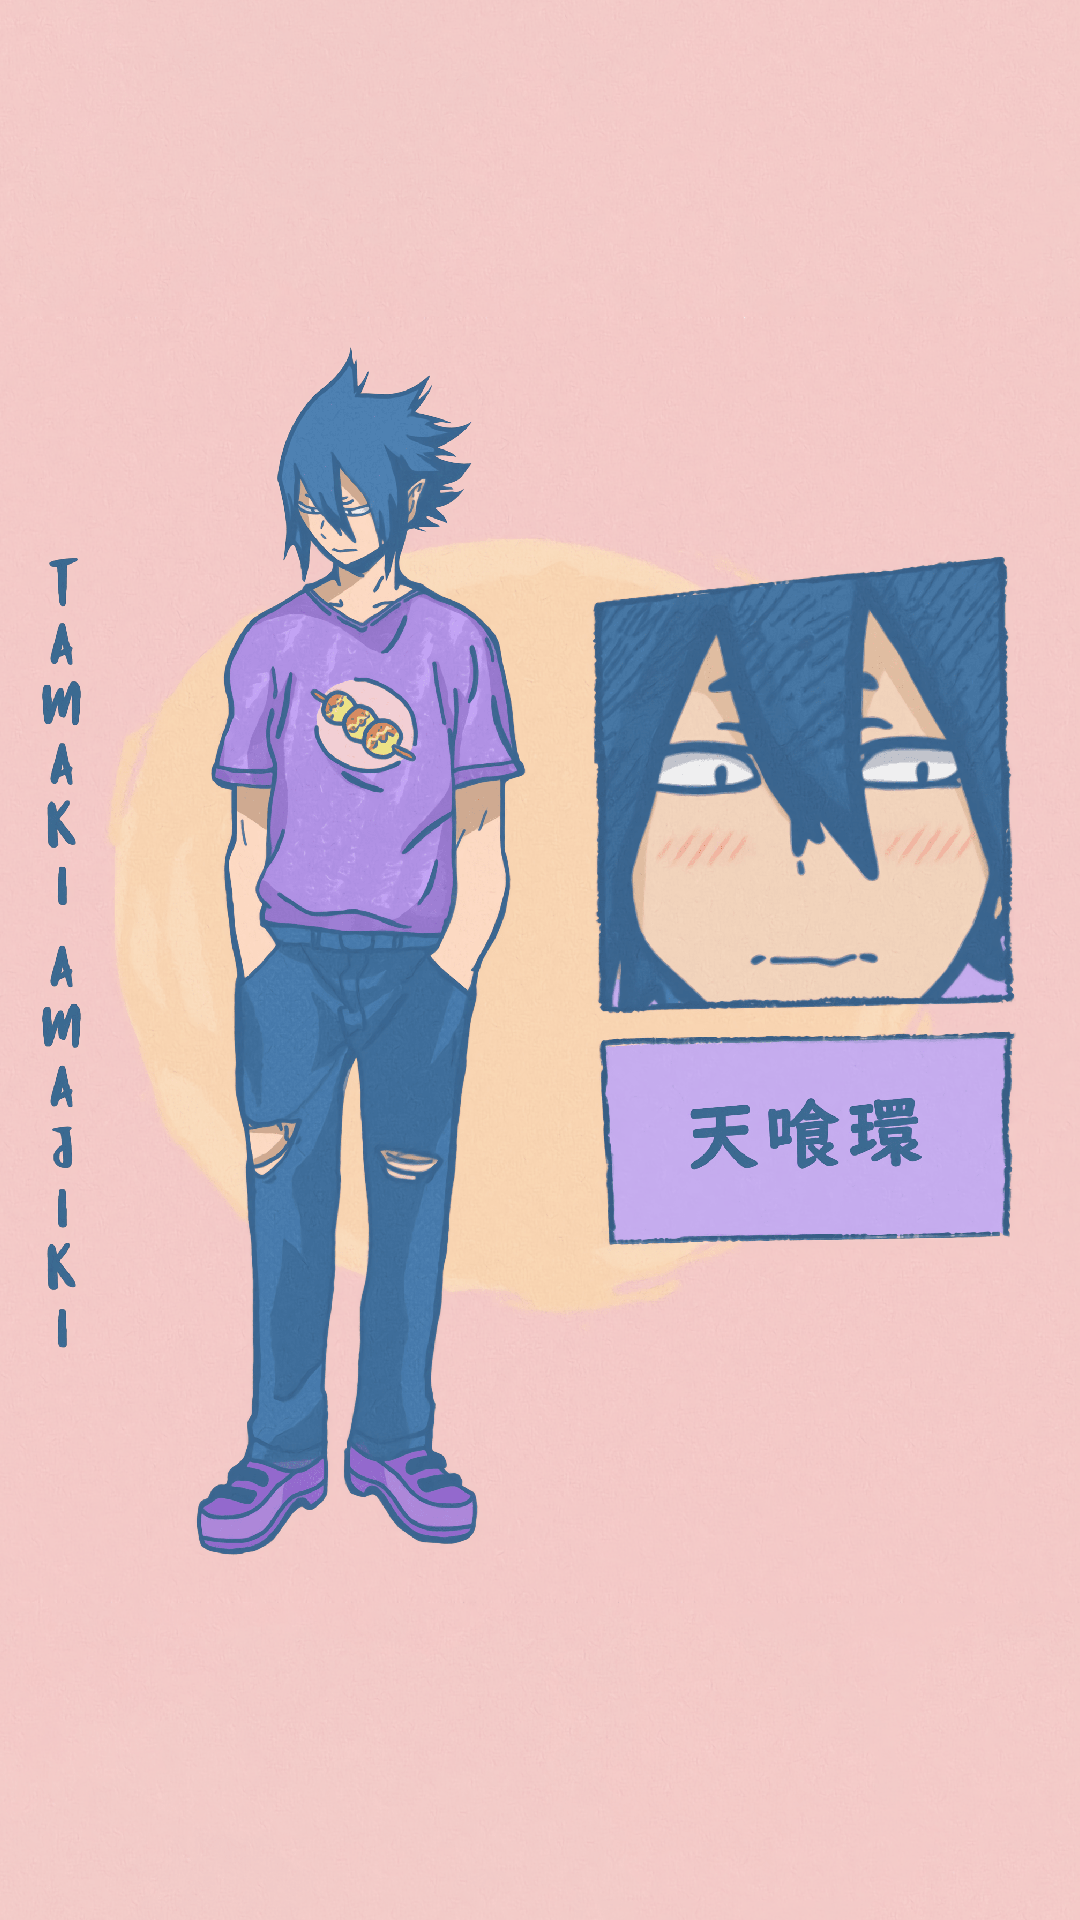 11 Tamaki Amajiki Wallpapers for iPhone and Android by Michael Green